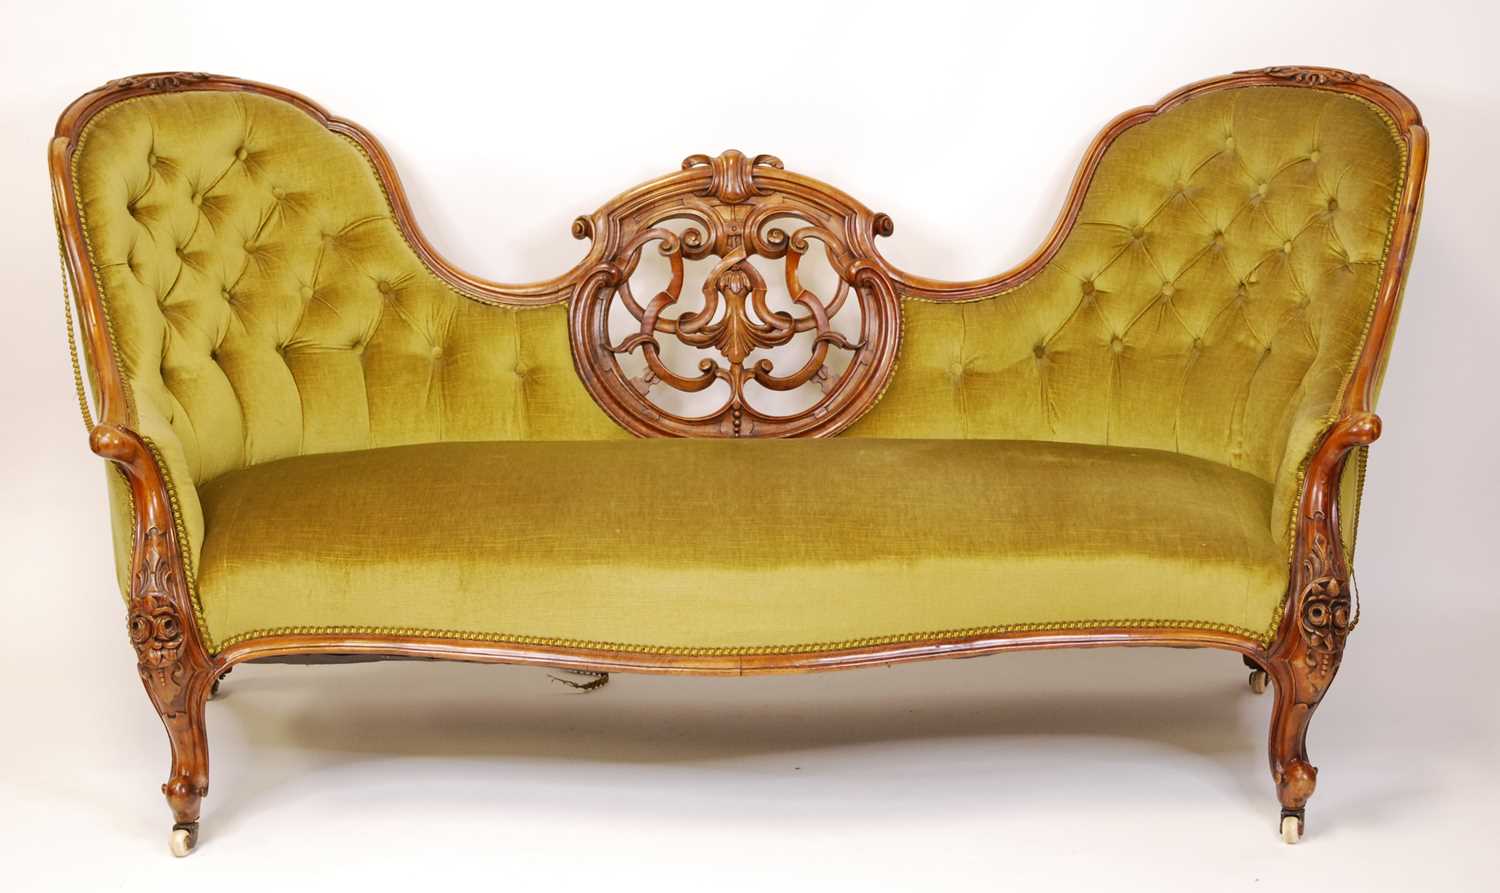 A mid-Victorian walnut and floral carved showframe double humpback settee, having intricate